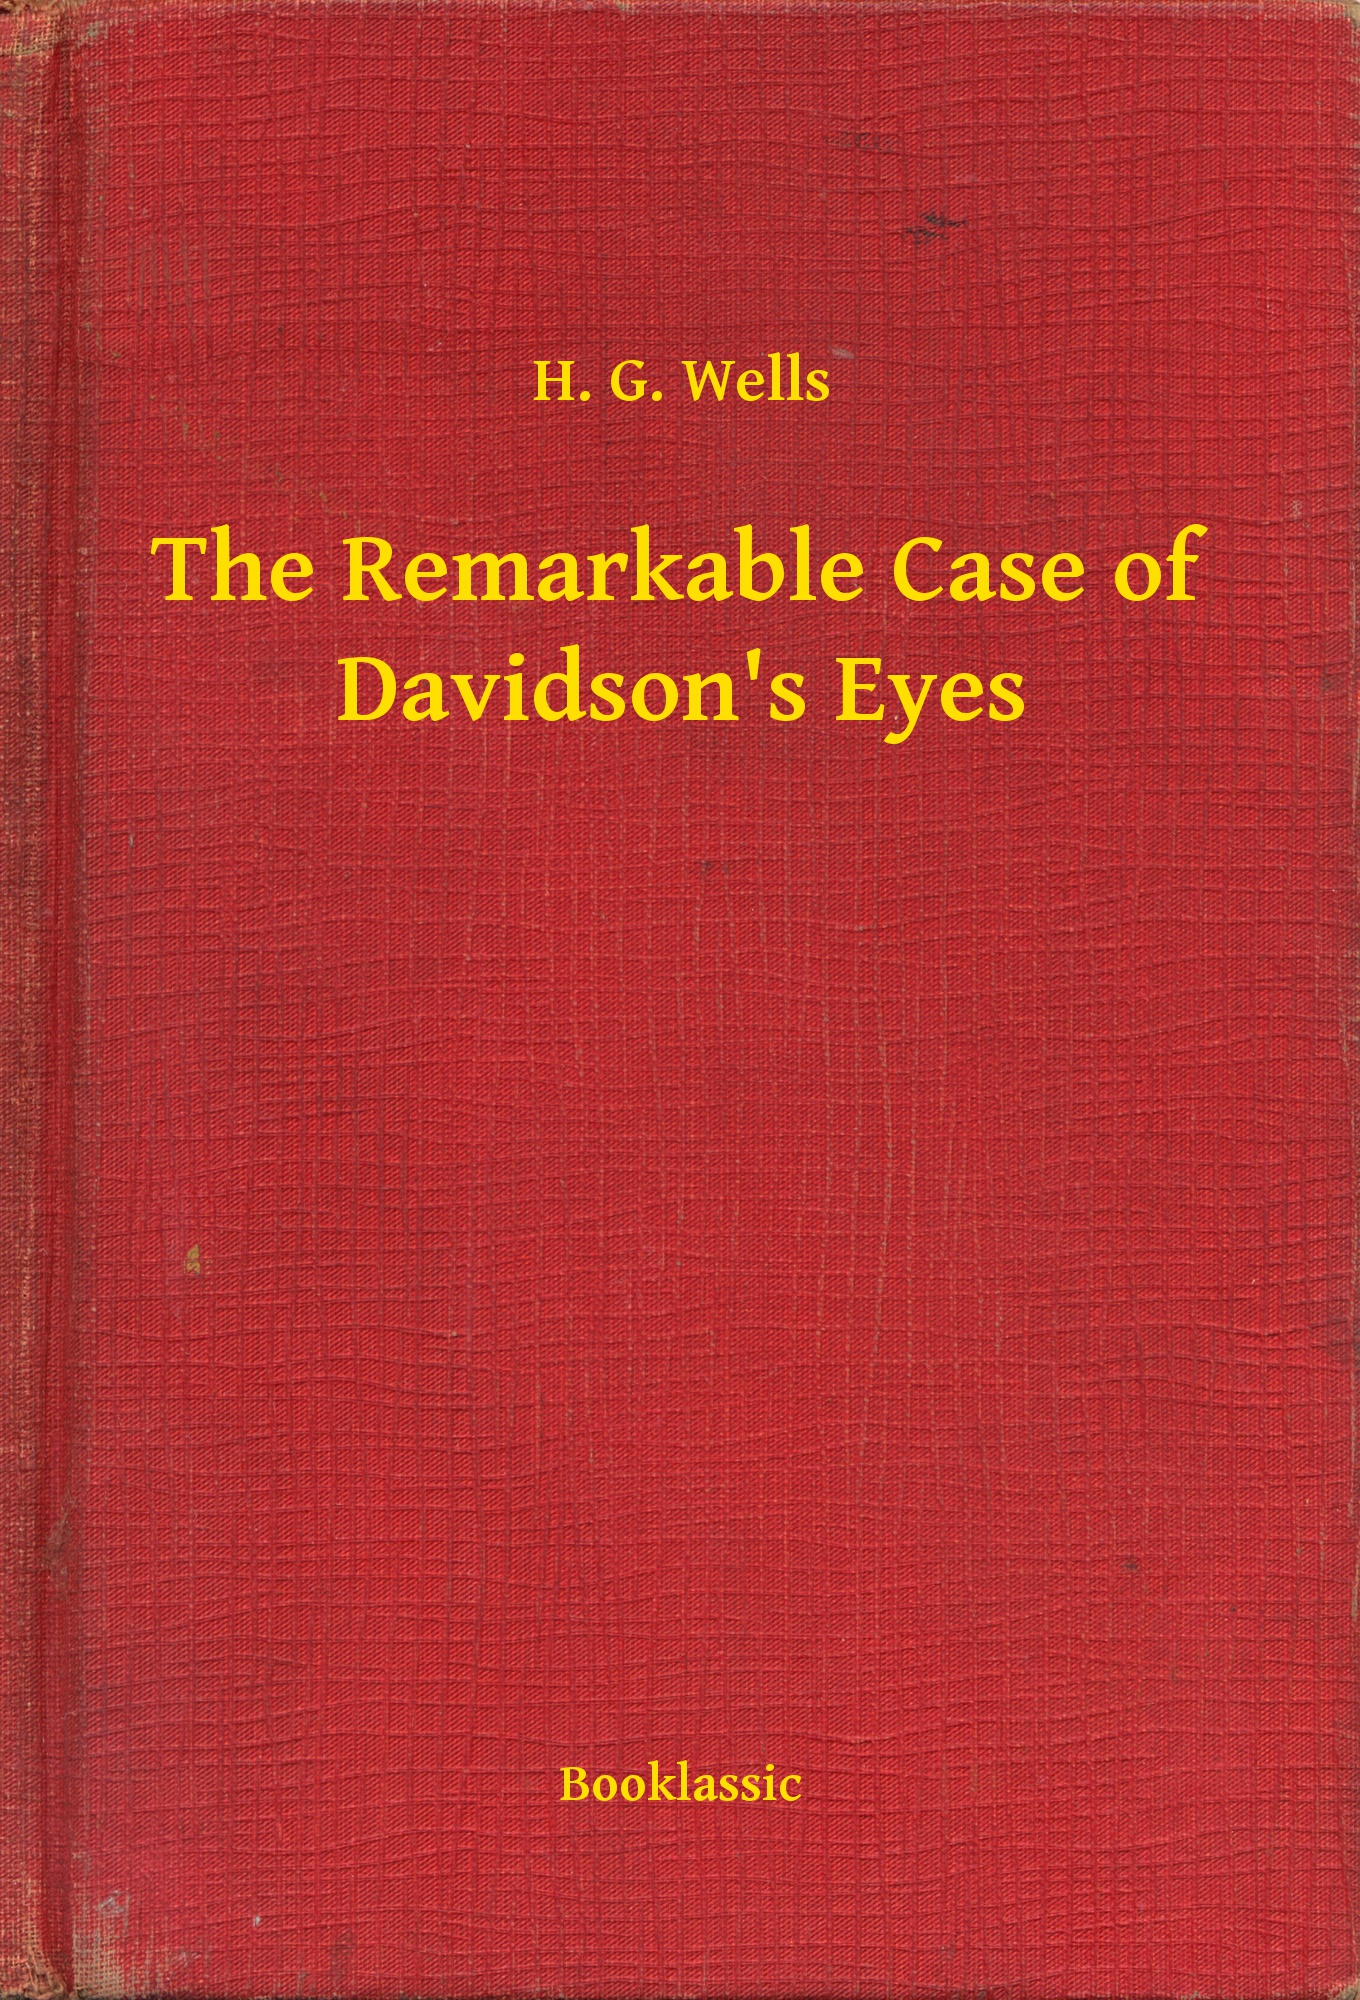 The Remarkable Case of Davidson"s Eyes